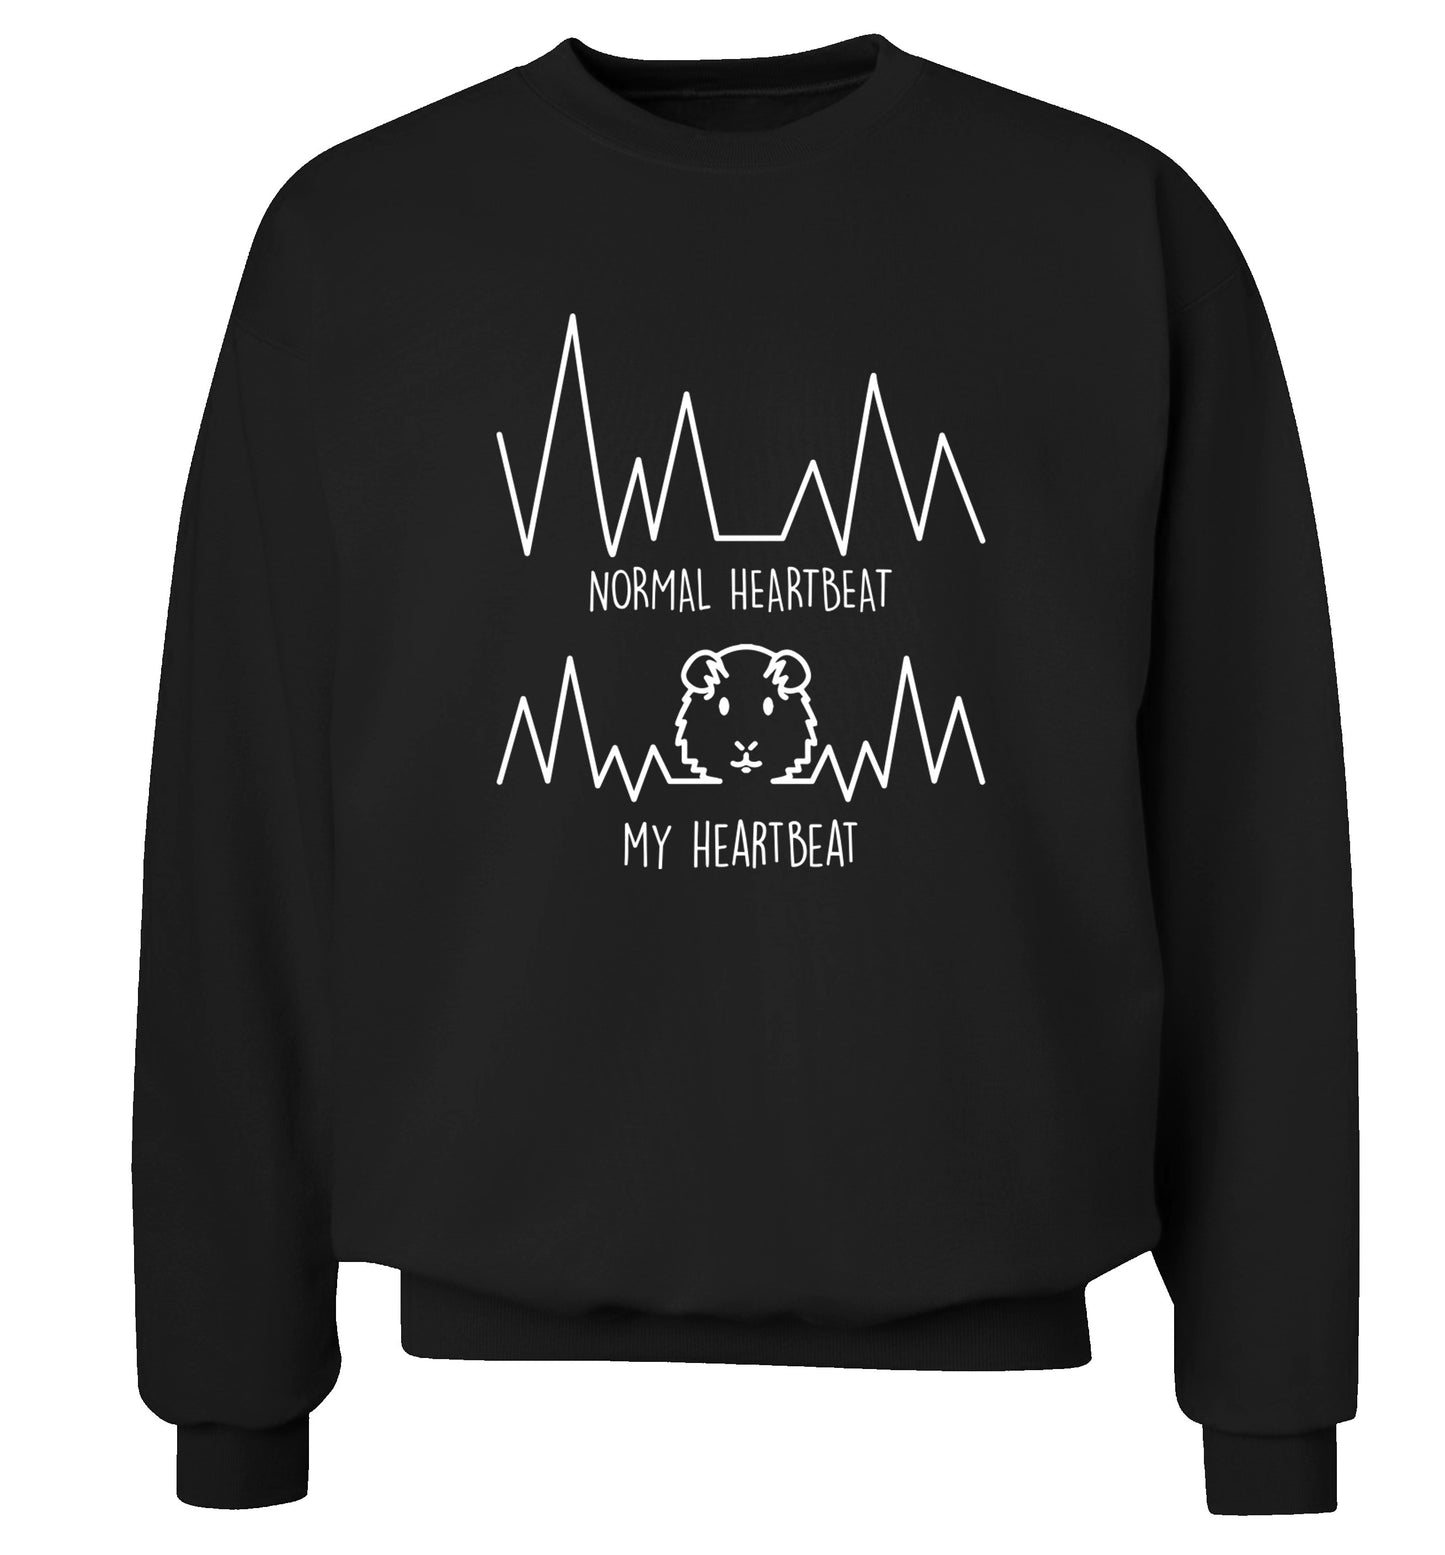 Normal heartbeat vs my heartbeat guinea pig lover Adult's unisex black  sweater 2XL